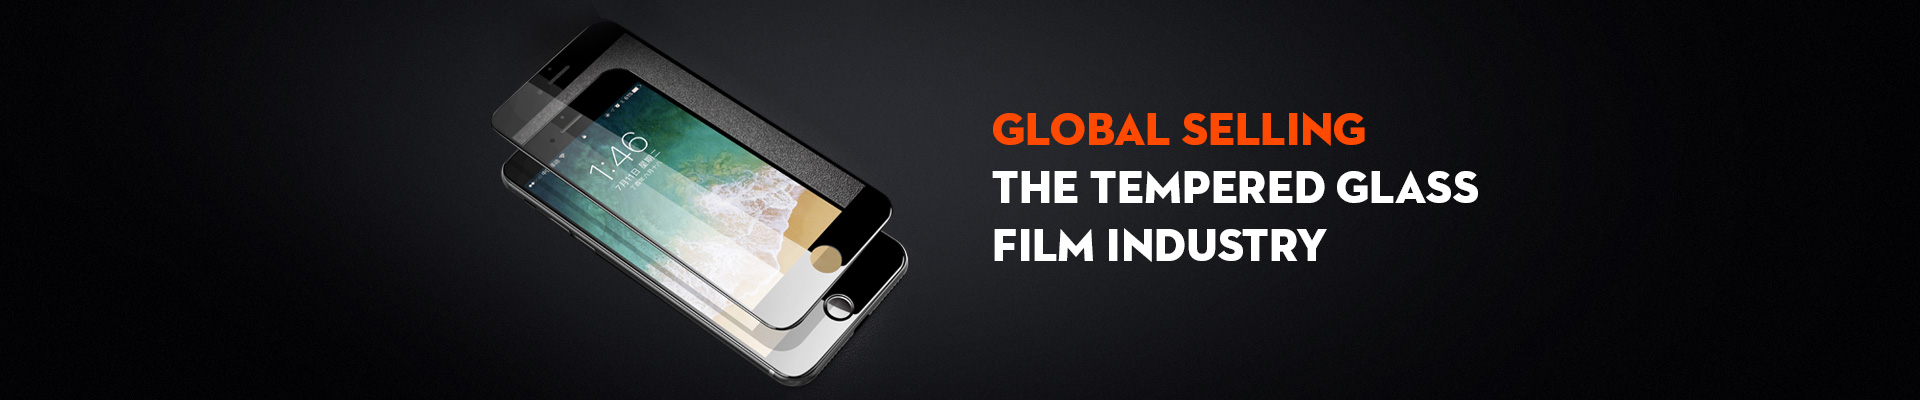 GLOBAL SELLING  THE TEMPERED GLASS FILM INDUSTRY